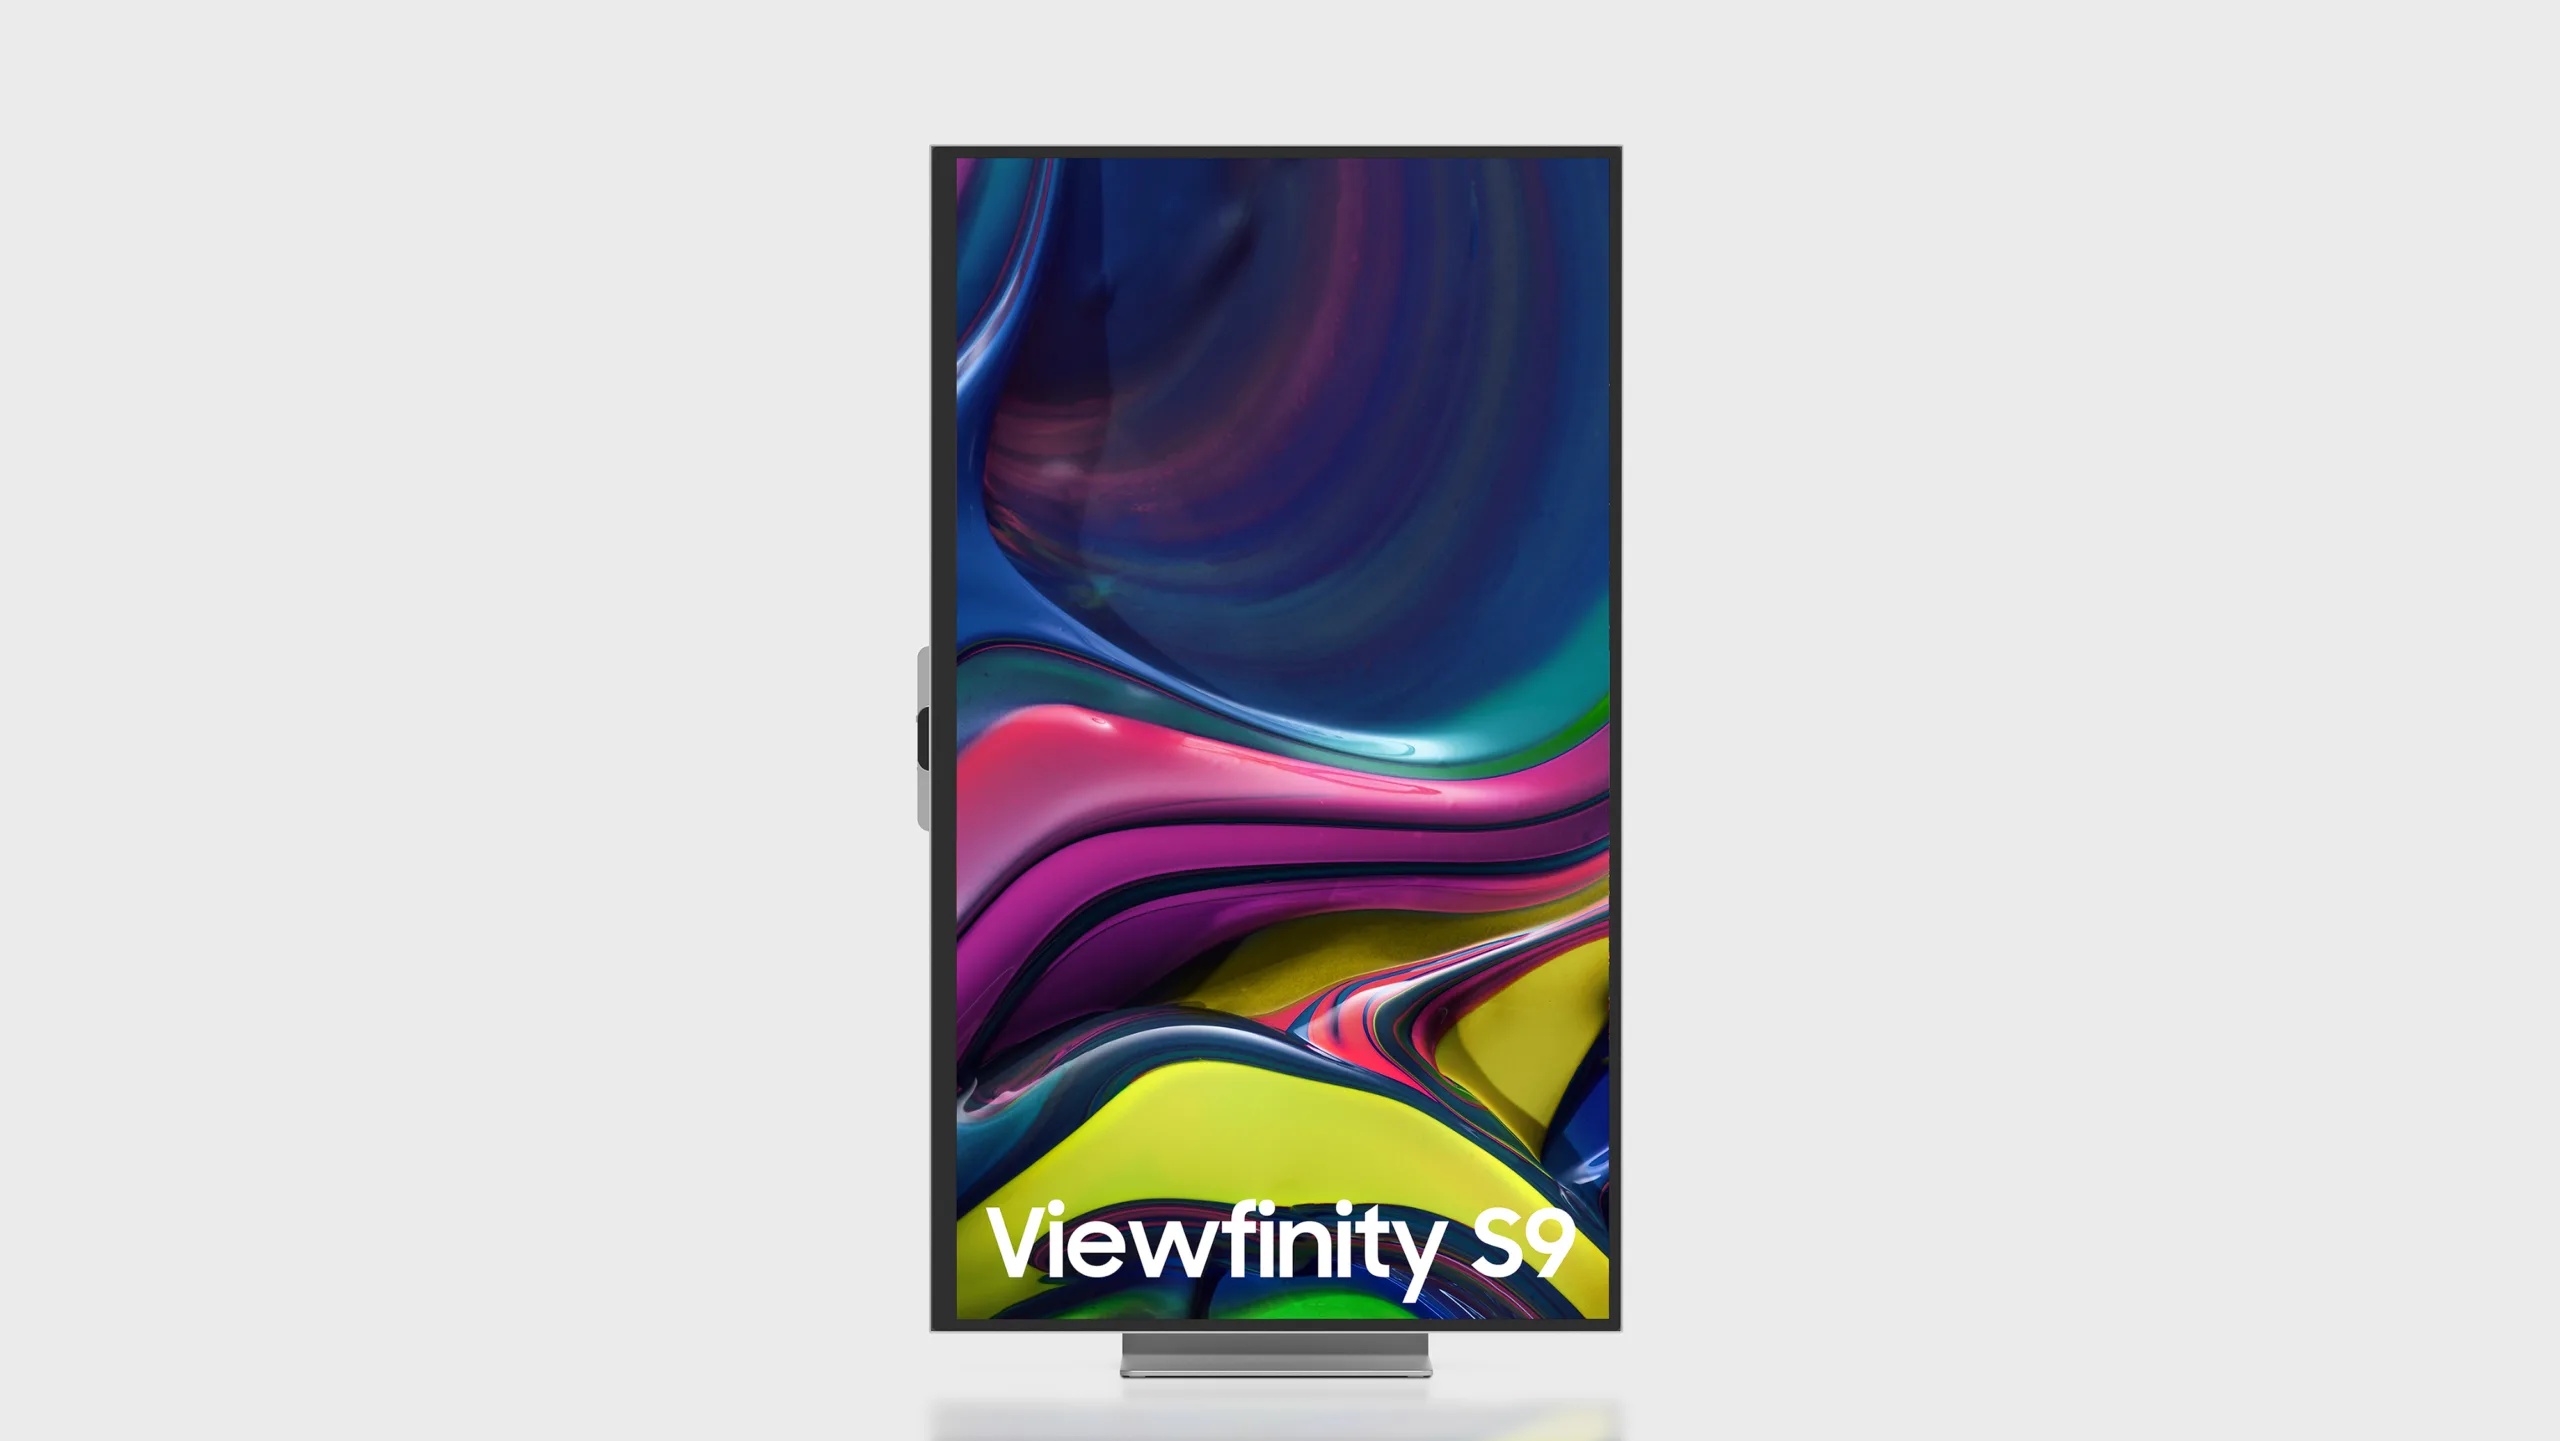 CES Monitor Lineup PR dl8 Viewfinity S9 scaled